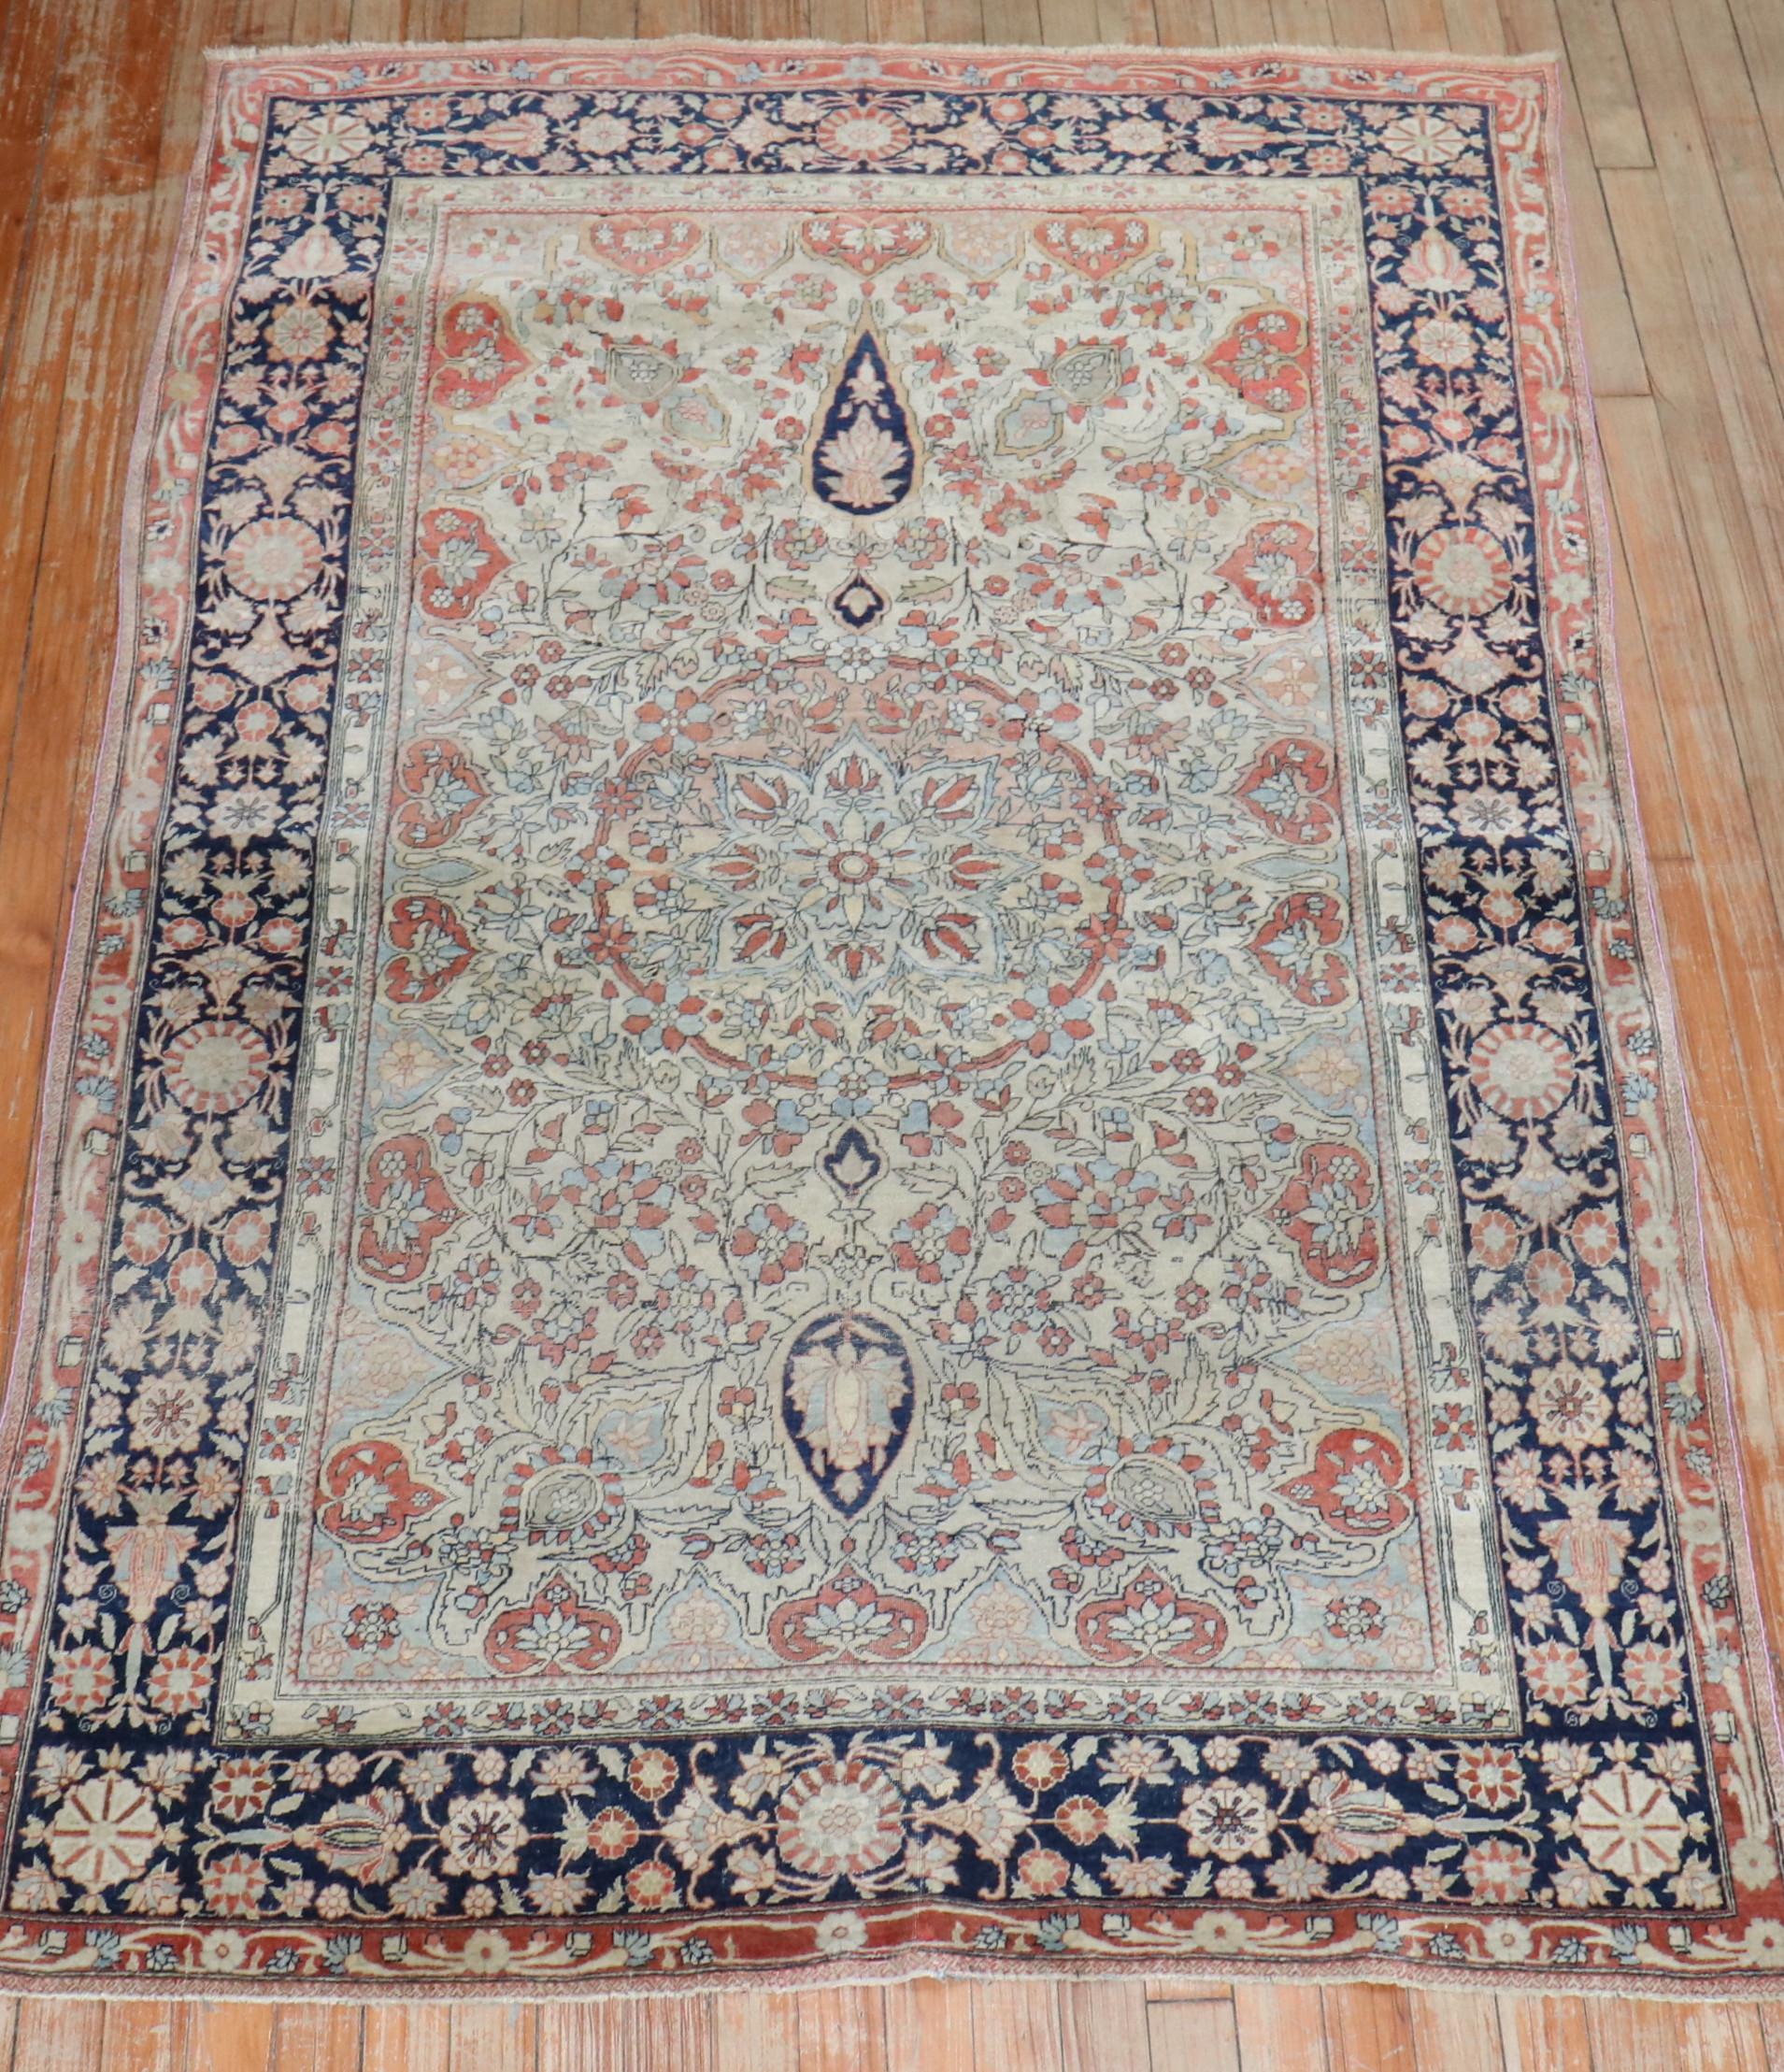 Late 19th Century  Mohtasham Kashan Rug

4'3'' x 6'6''

The most rare group of Kashan carpets that utilizes non-traditional designs and color palettes is the “Motashem Kashan,” which were woven up to the end of the 19th century. This elite class of